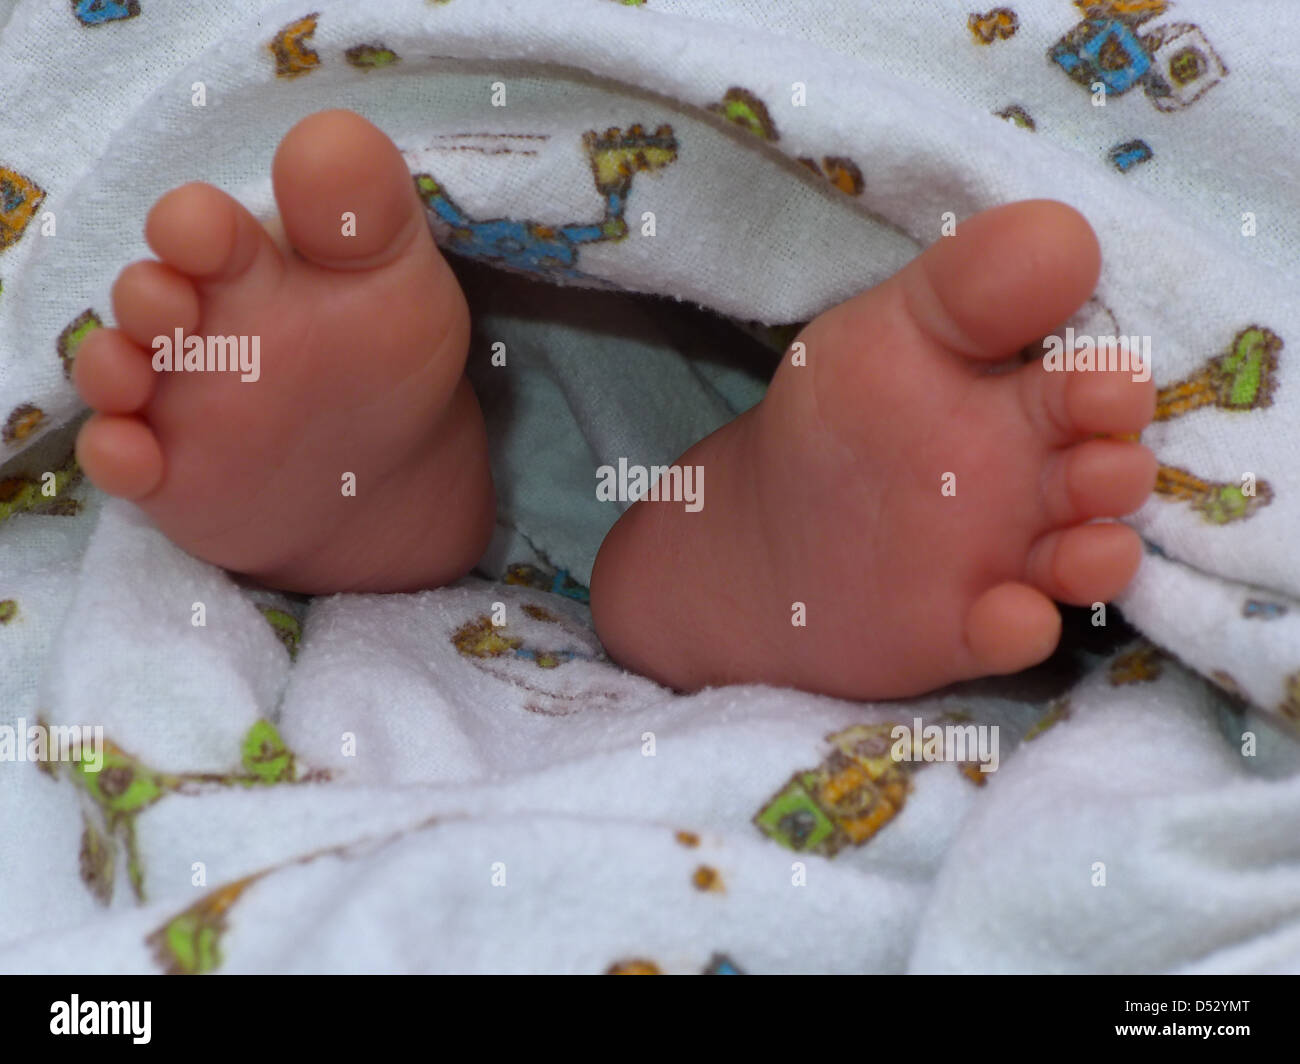 Cute baby feet sticking out of a blanket Stock Photo